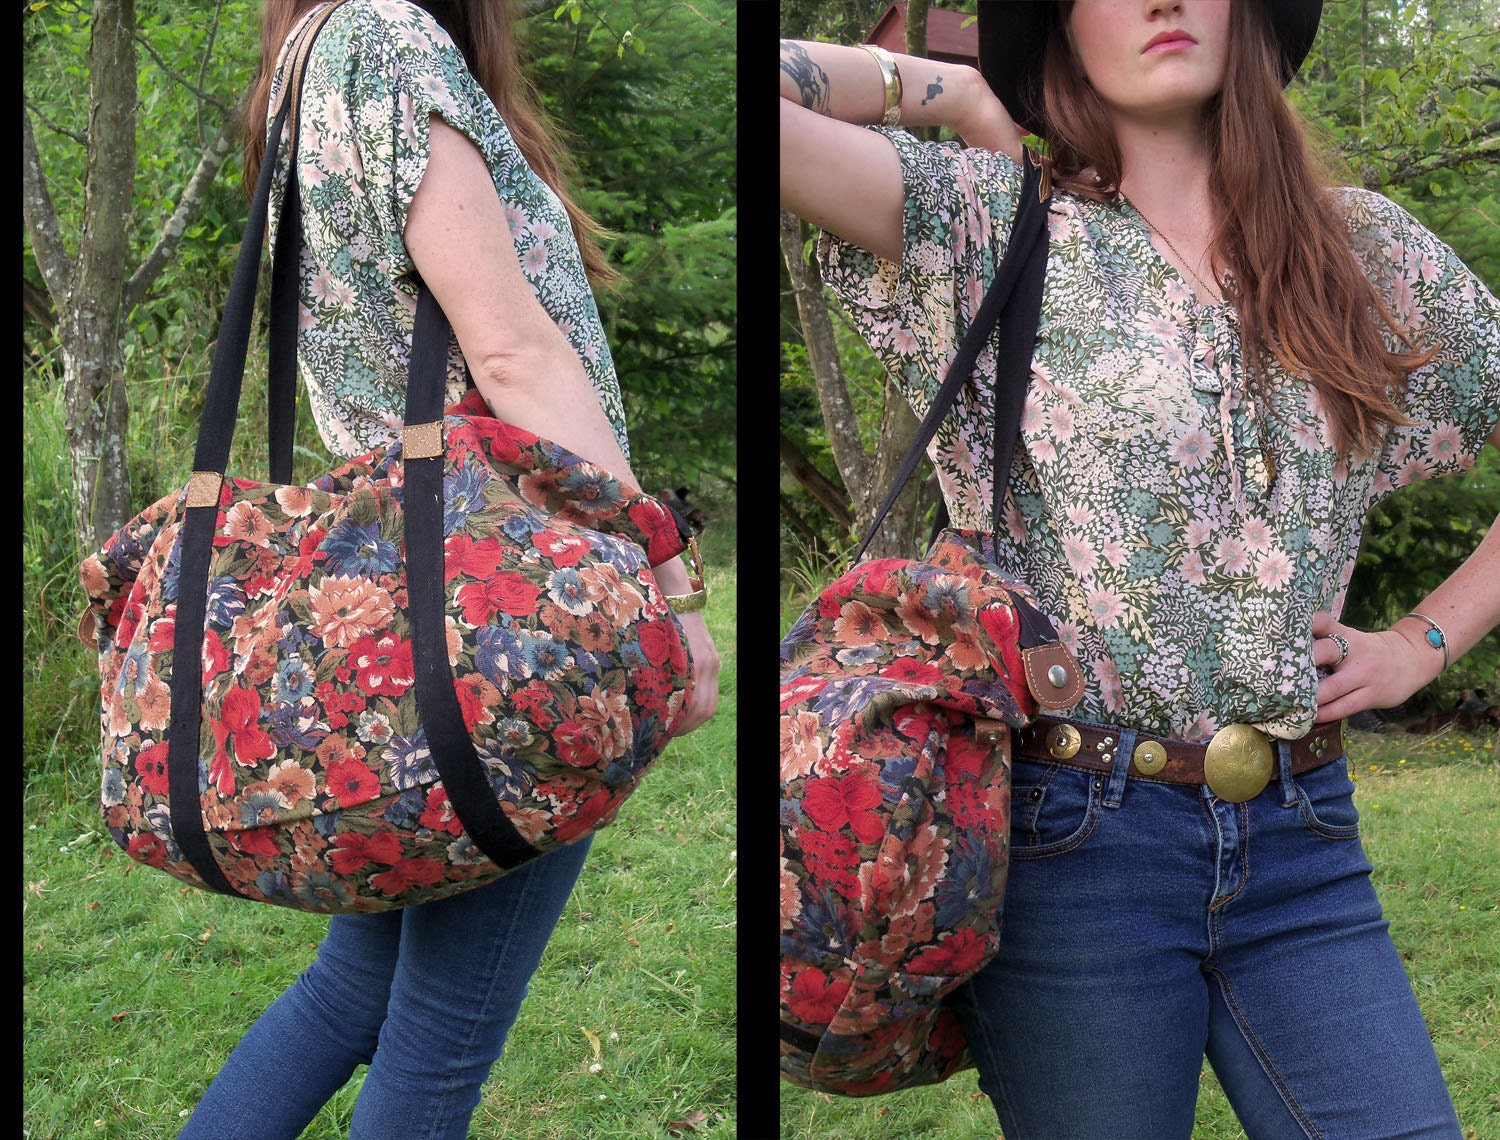 Floral Duffle Bags